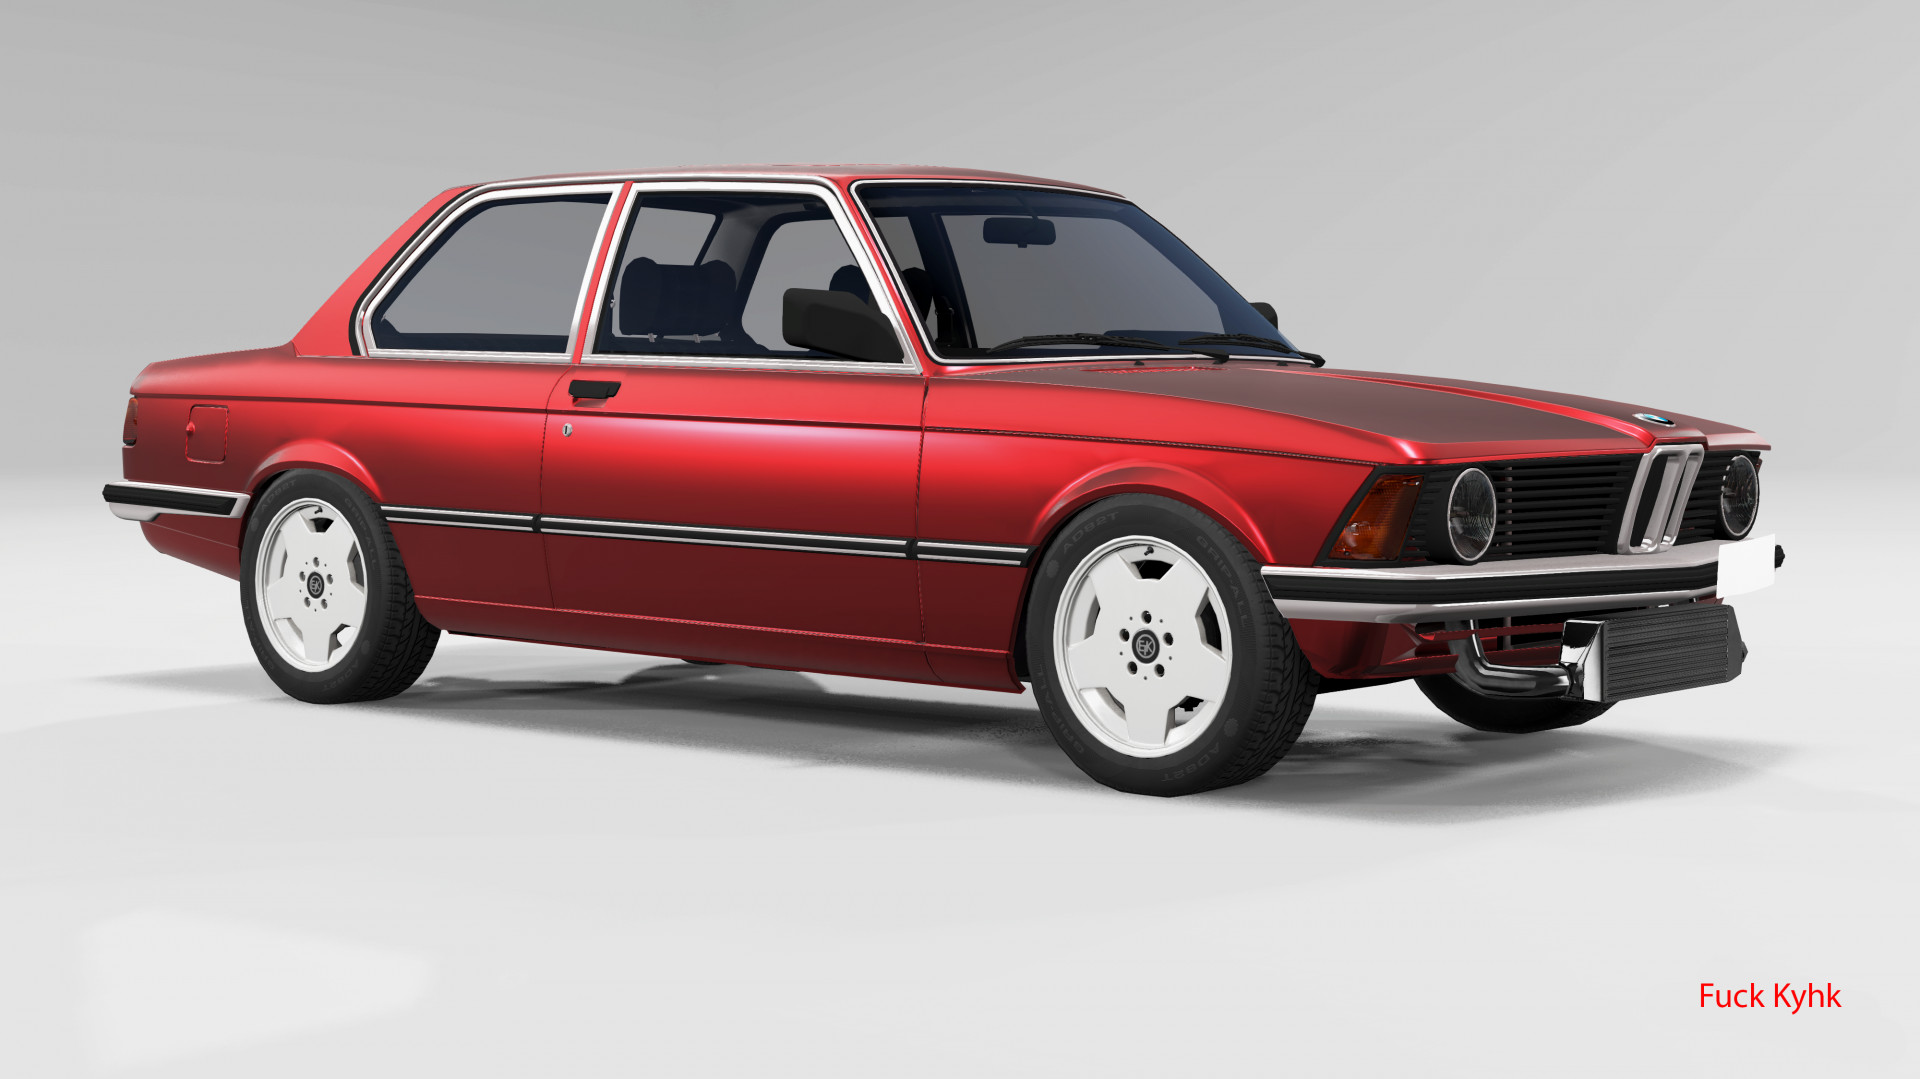 BMW E21 Improved and swapped [PBR]